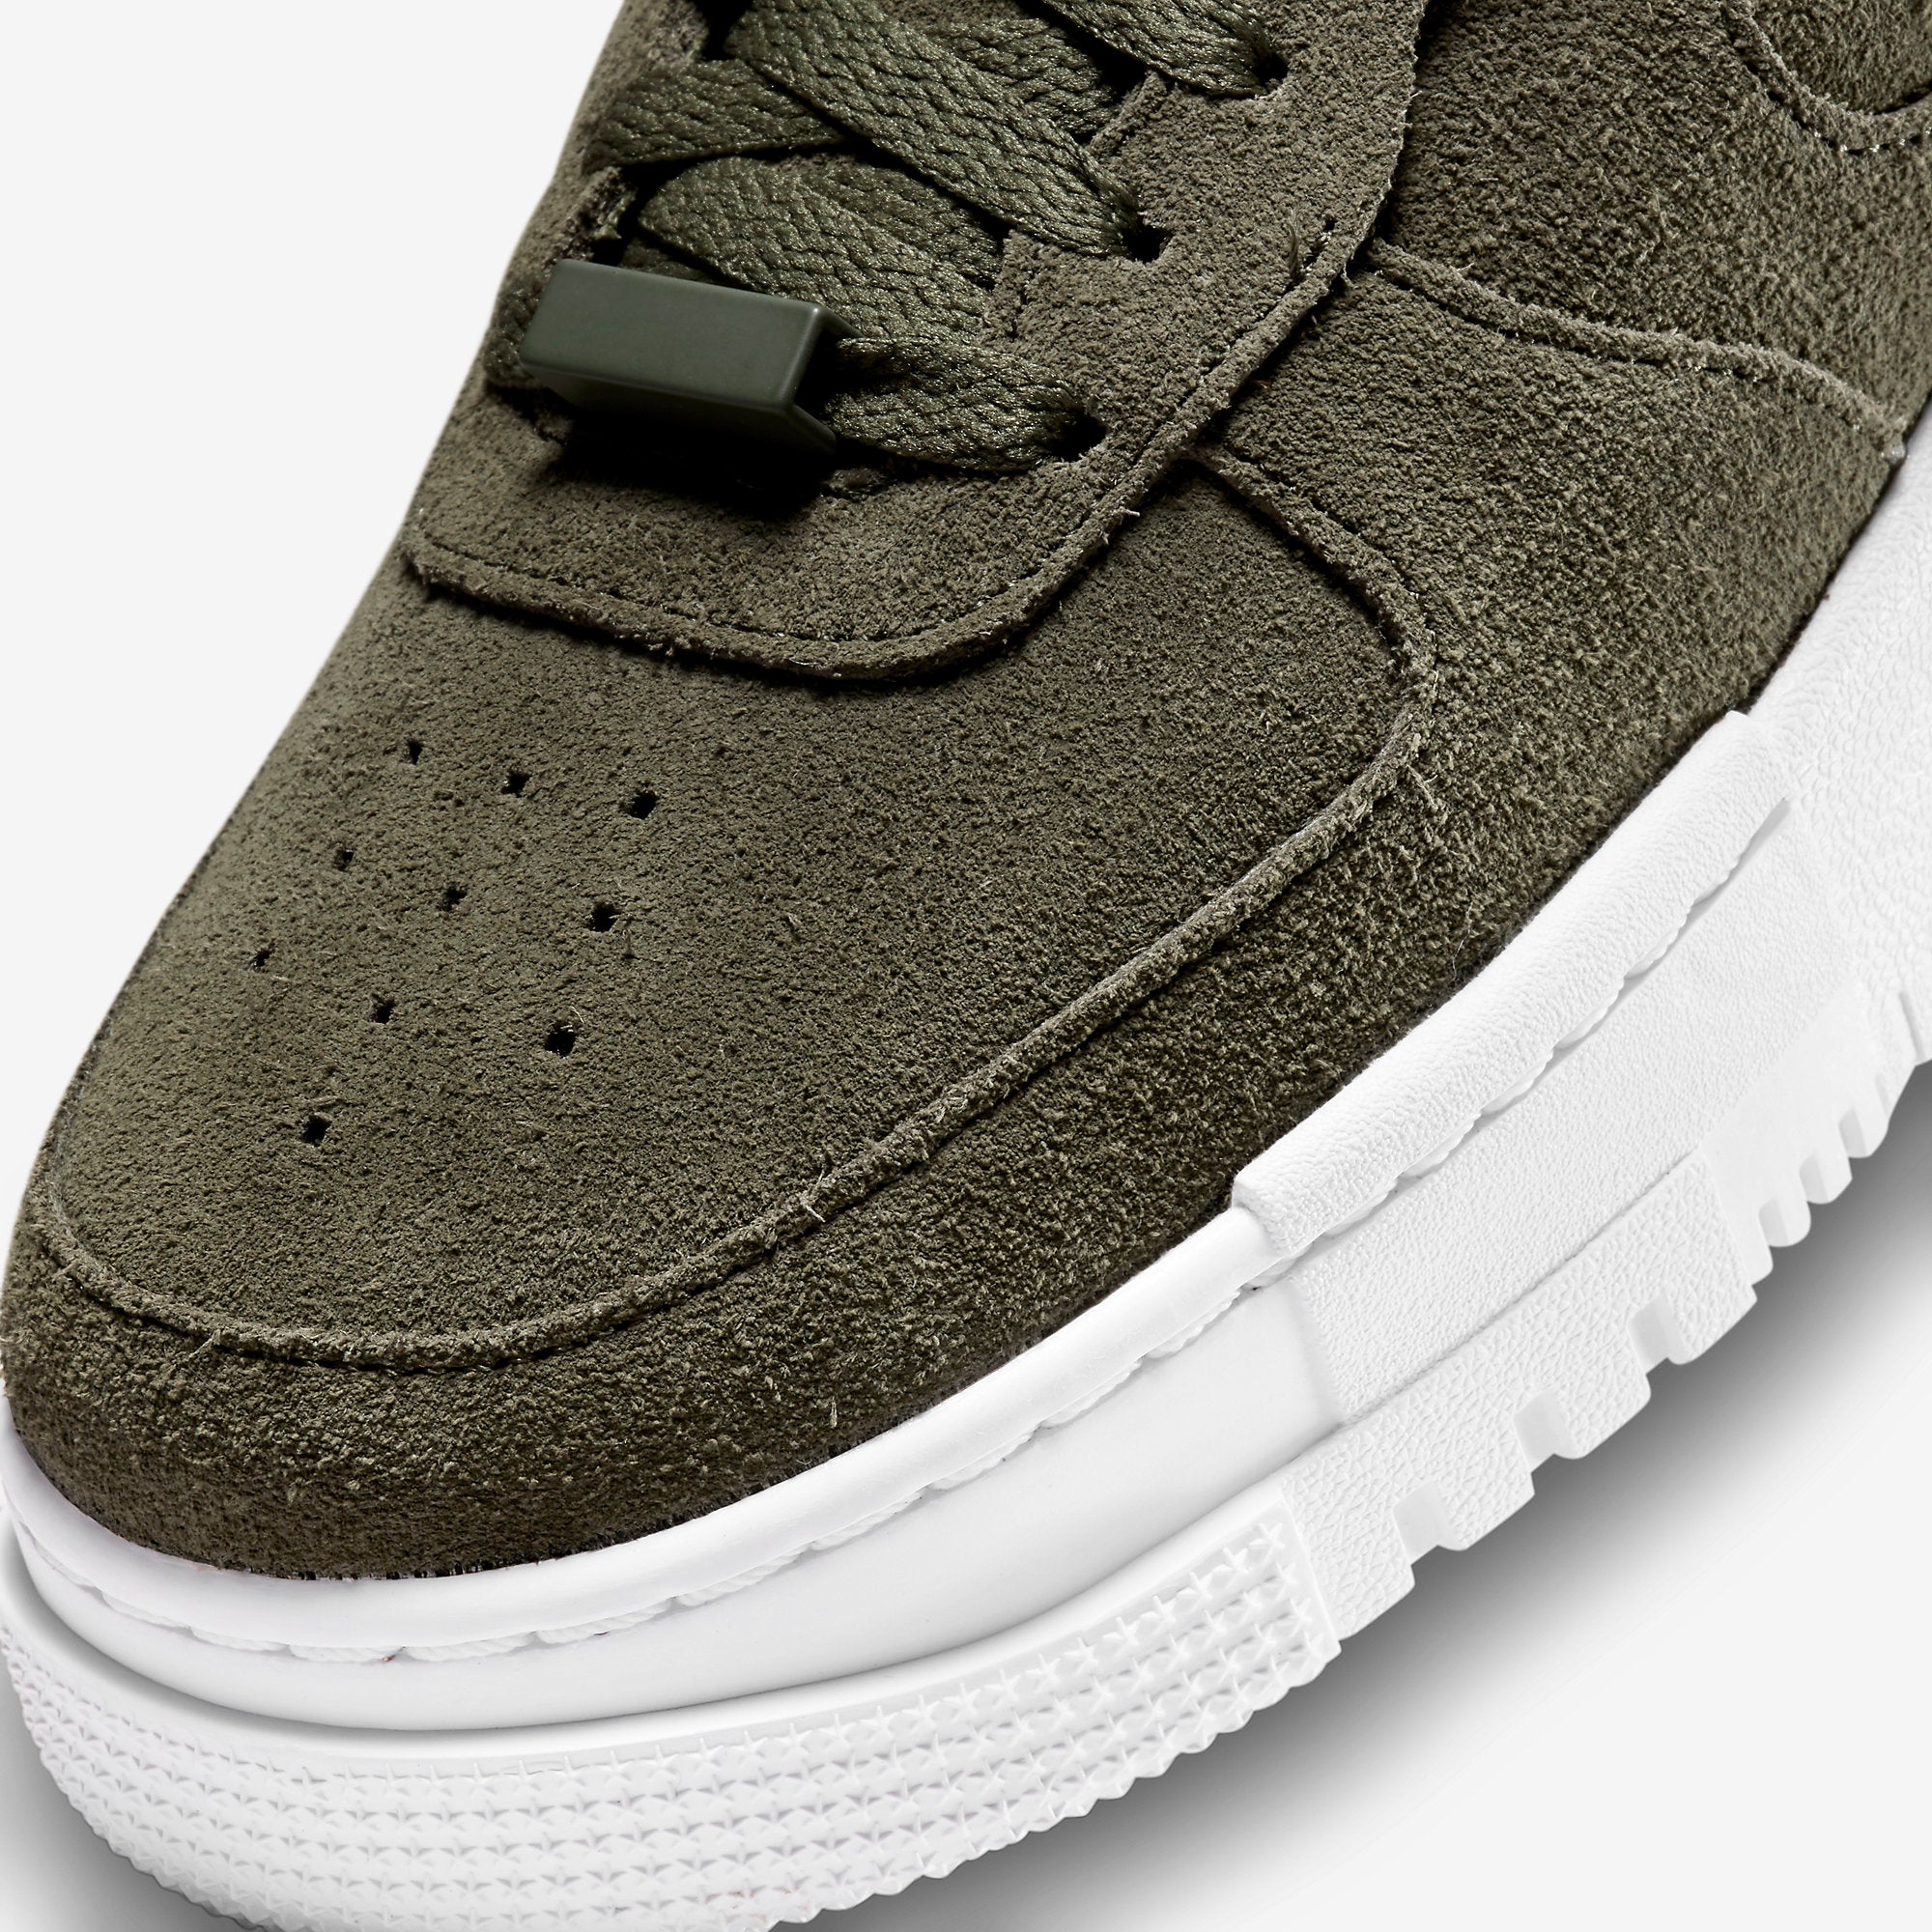 Nike Air Force 1 Pixel Green Suede, Where To Buy